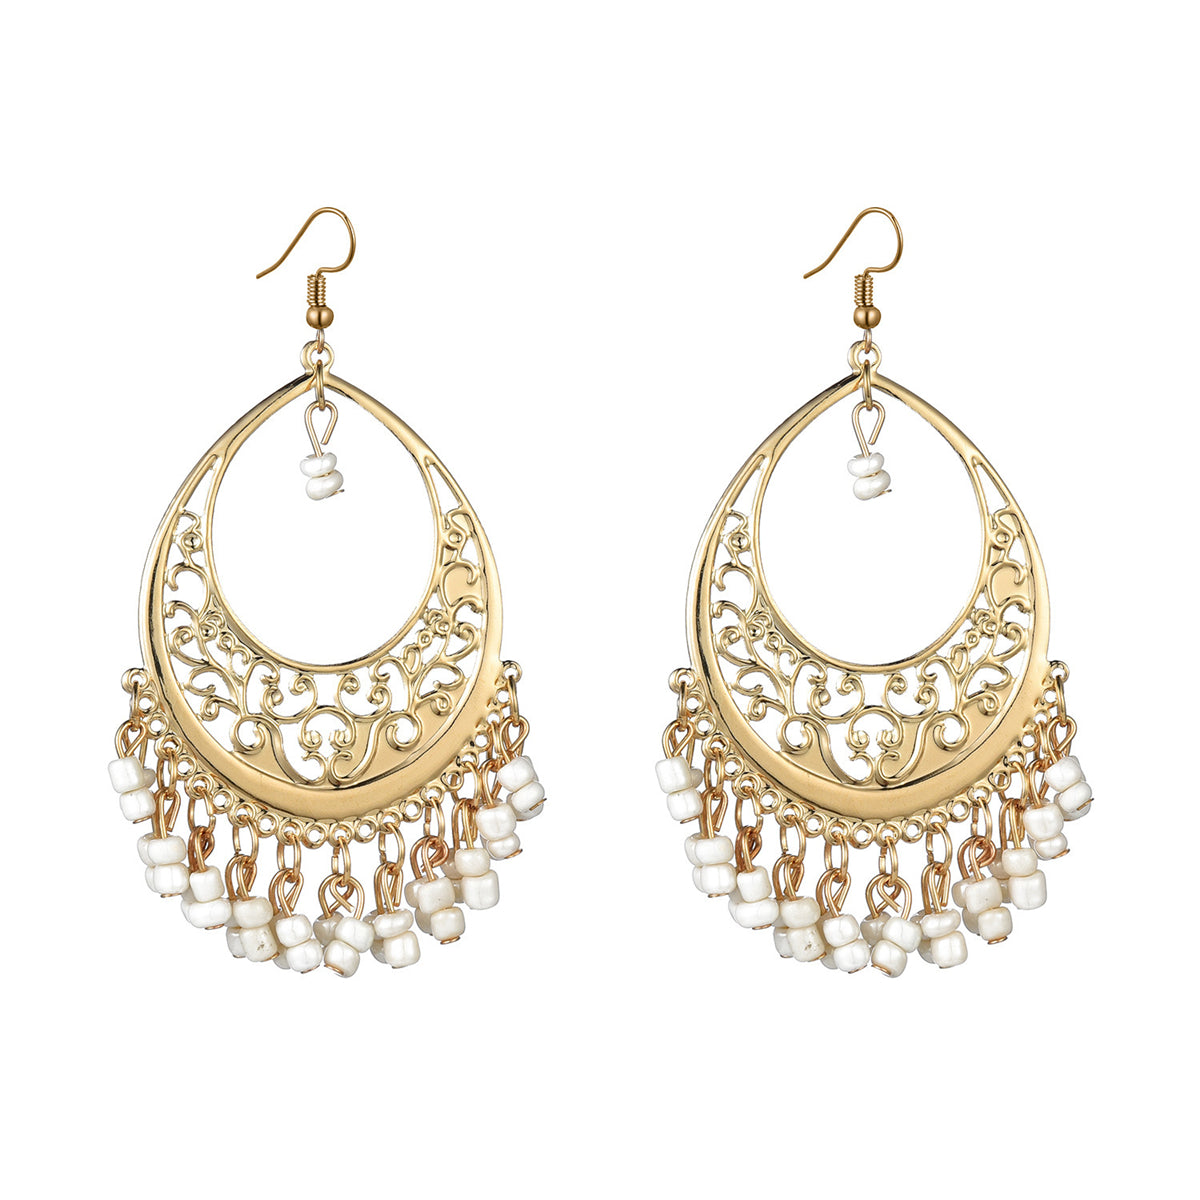 White Turquoise & 18K Gold-Plated Openwork Filigree Drop Earrings